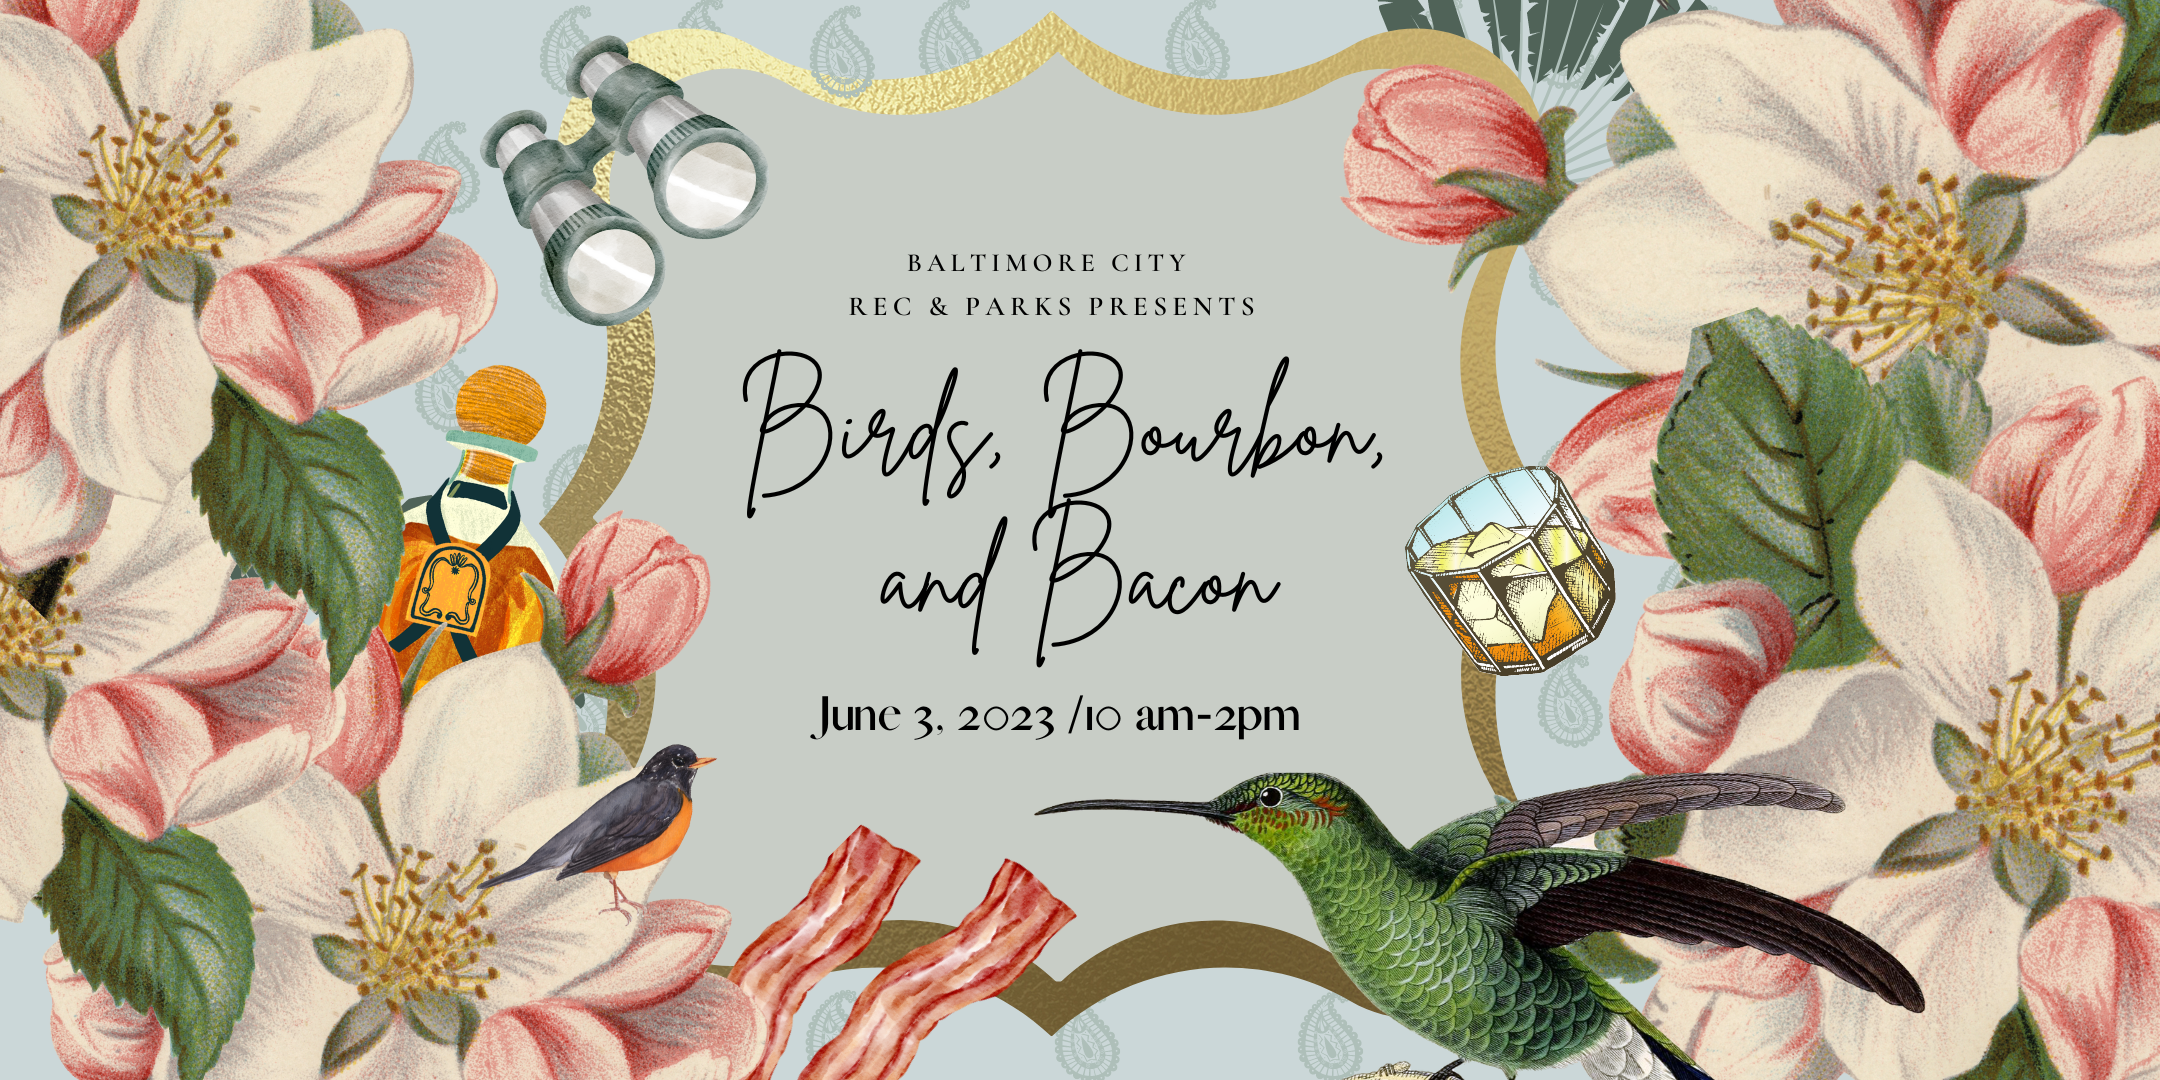 Nature-themed artwork and text: Birds, Bourbon, and Bacon